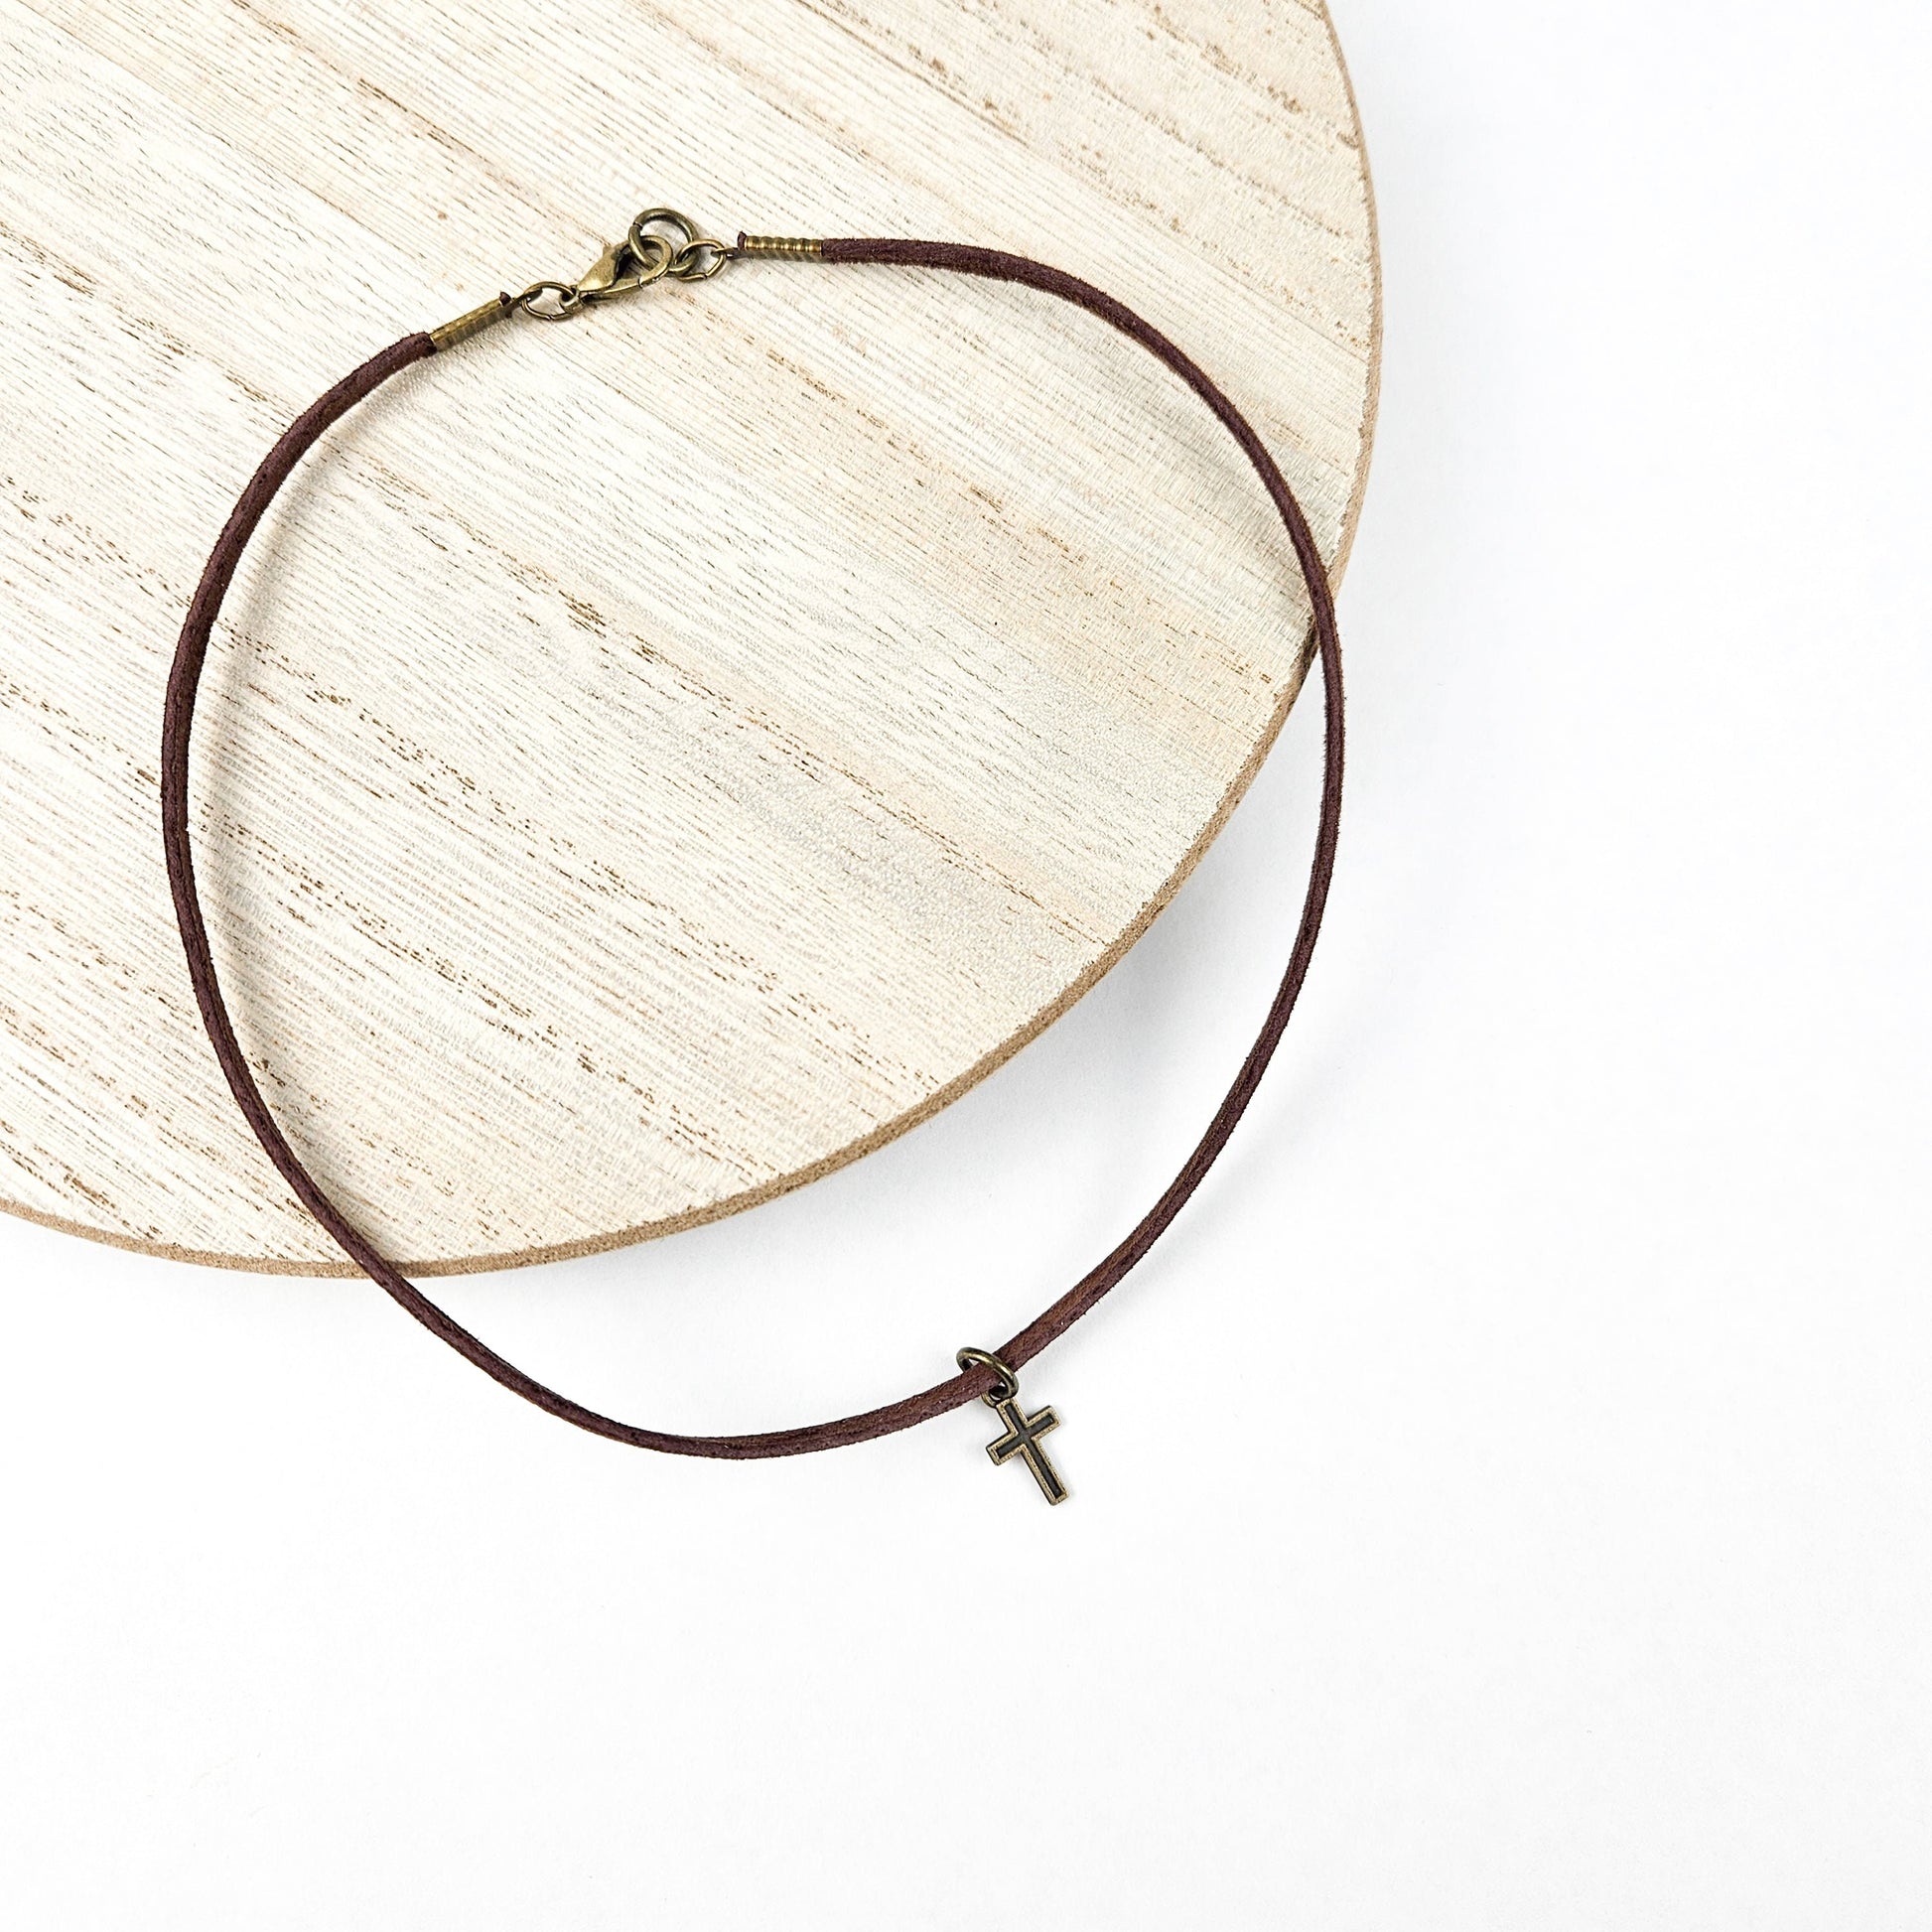 Child&#39;s Cross + Leather Essential Oil Diffuser Necklace